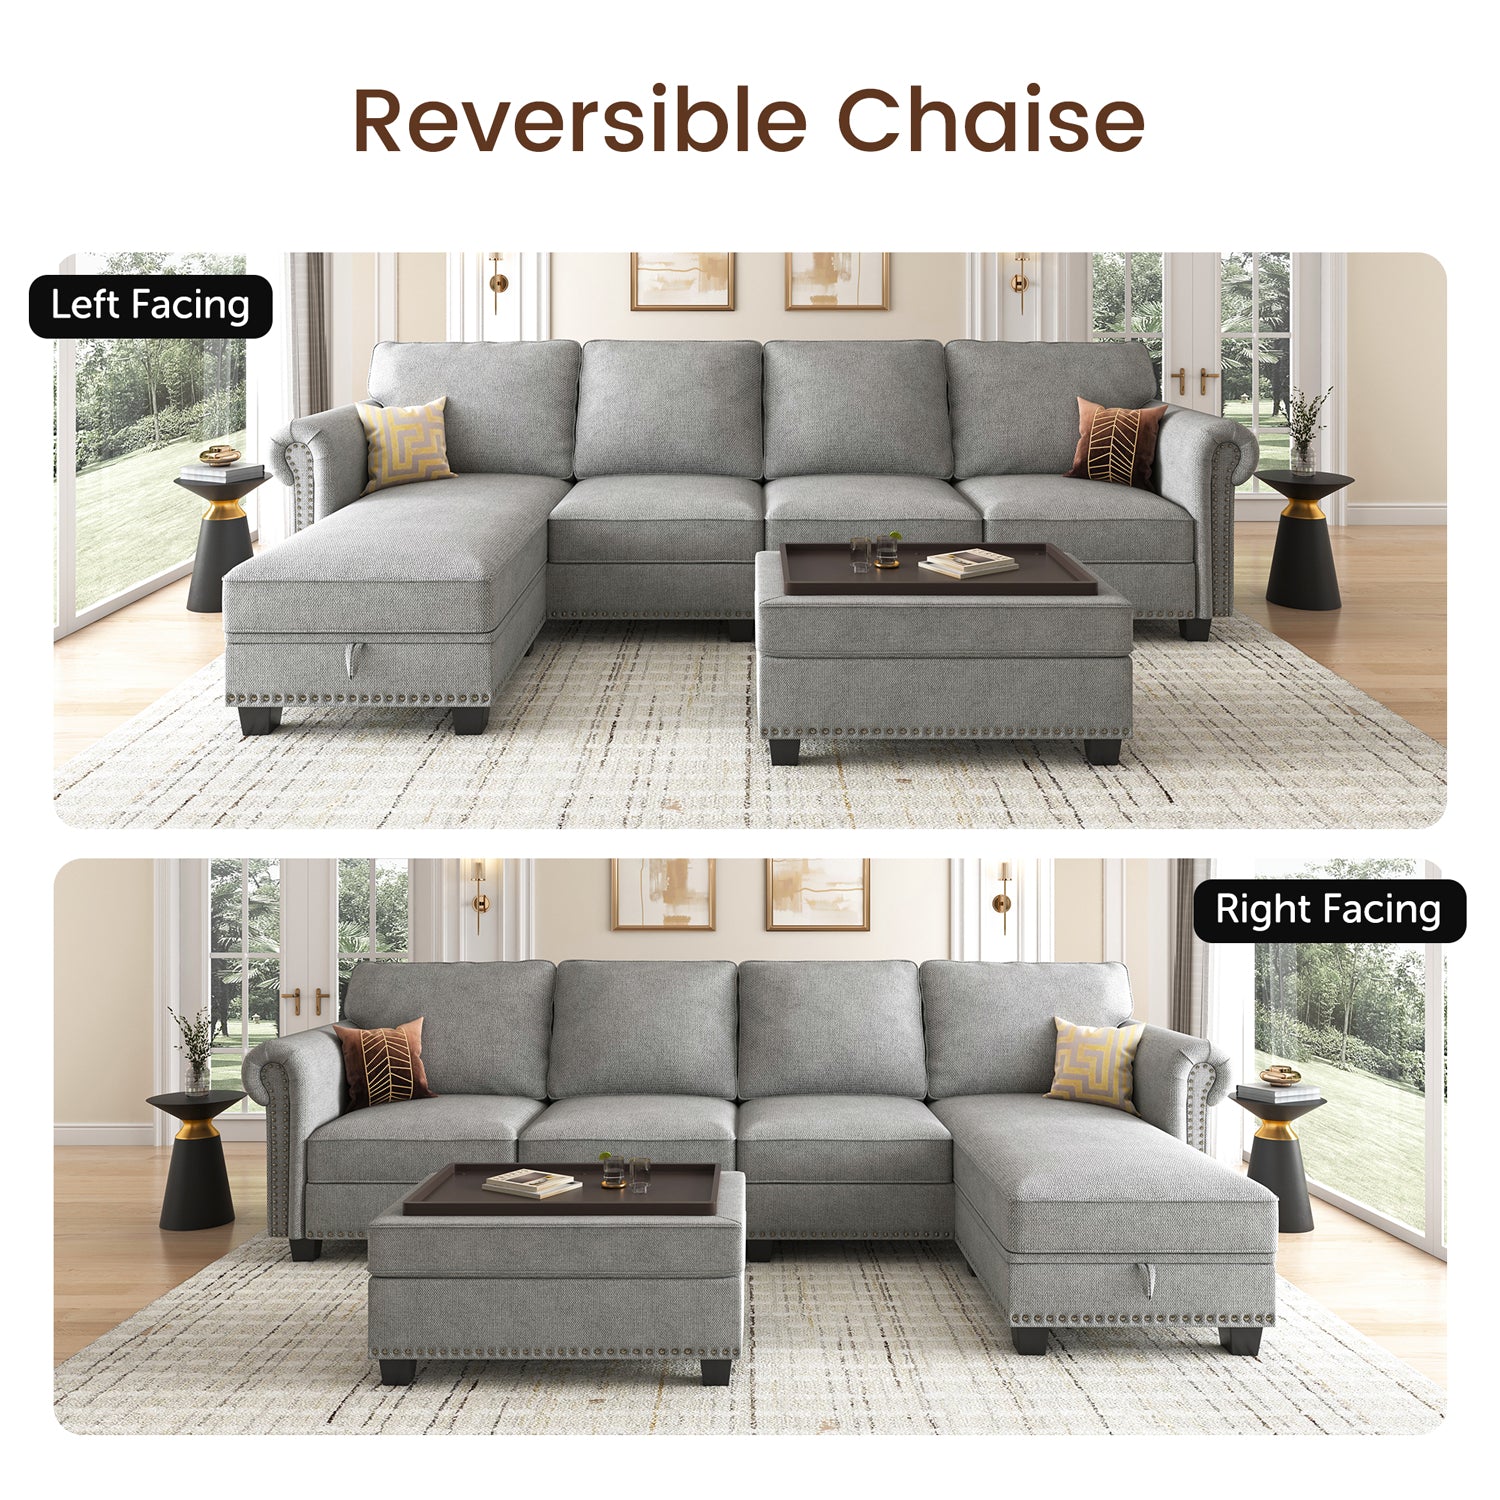 NOLANY Convertible Sectional Sofa 4-Seat with Reversible Chaise L Shaped Couch with Storage Ottoman for Living Room Furniture